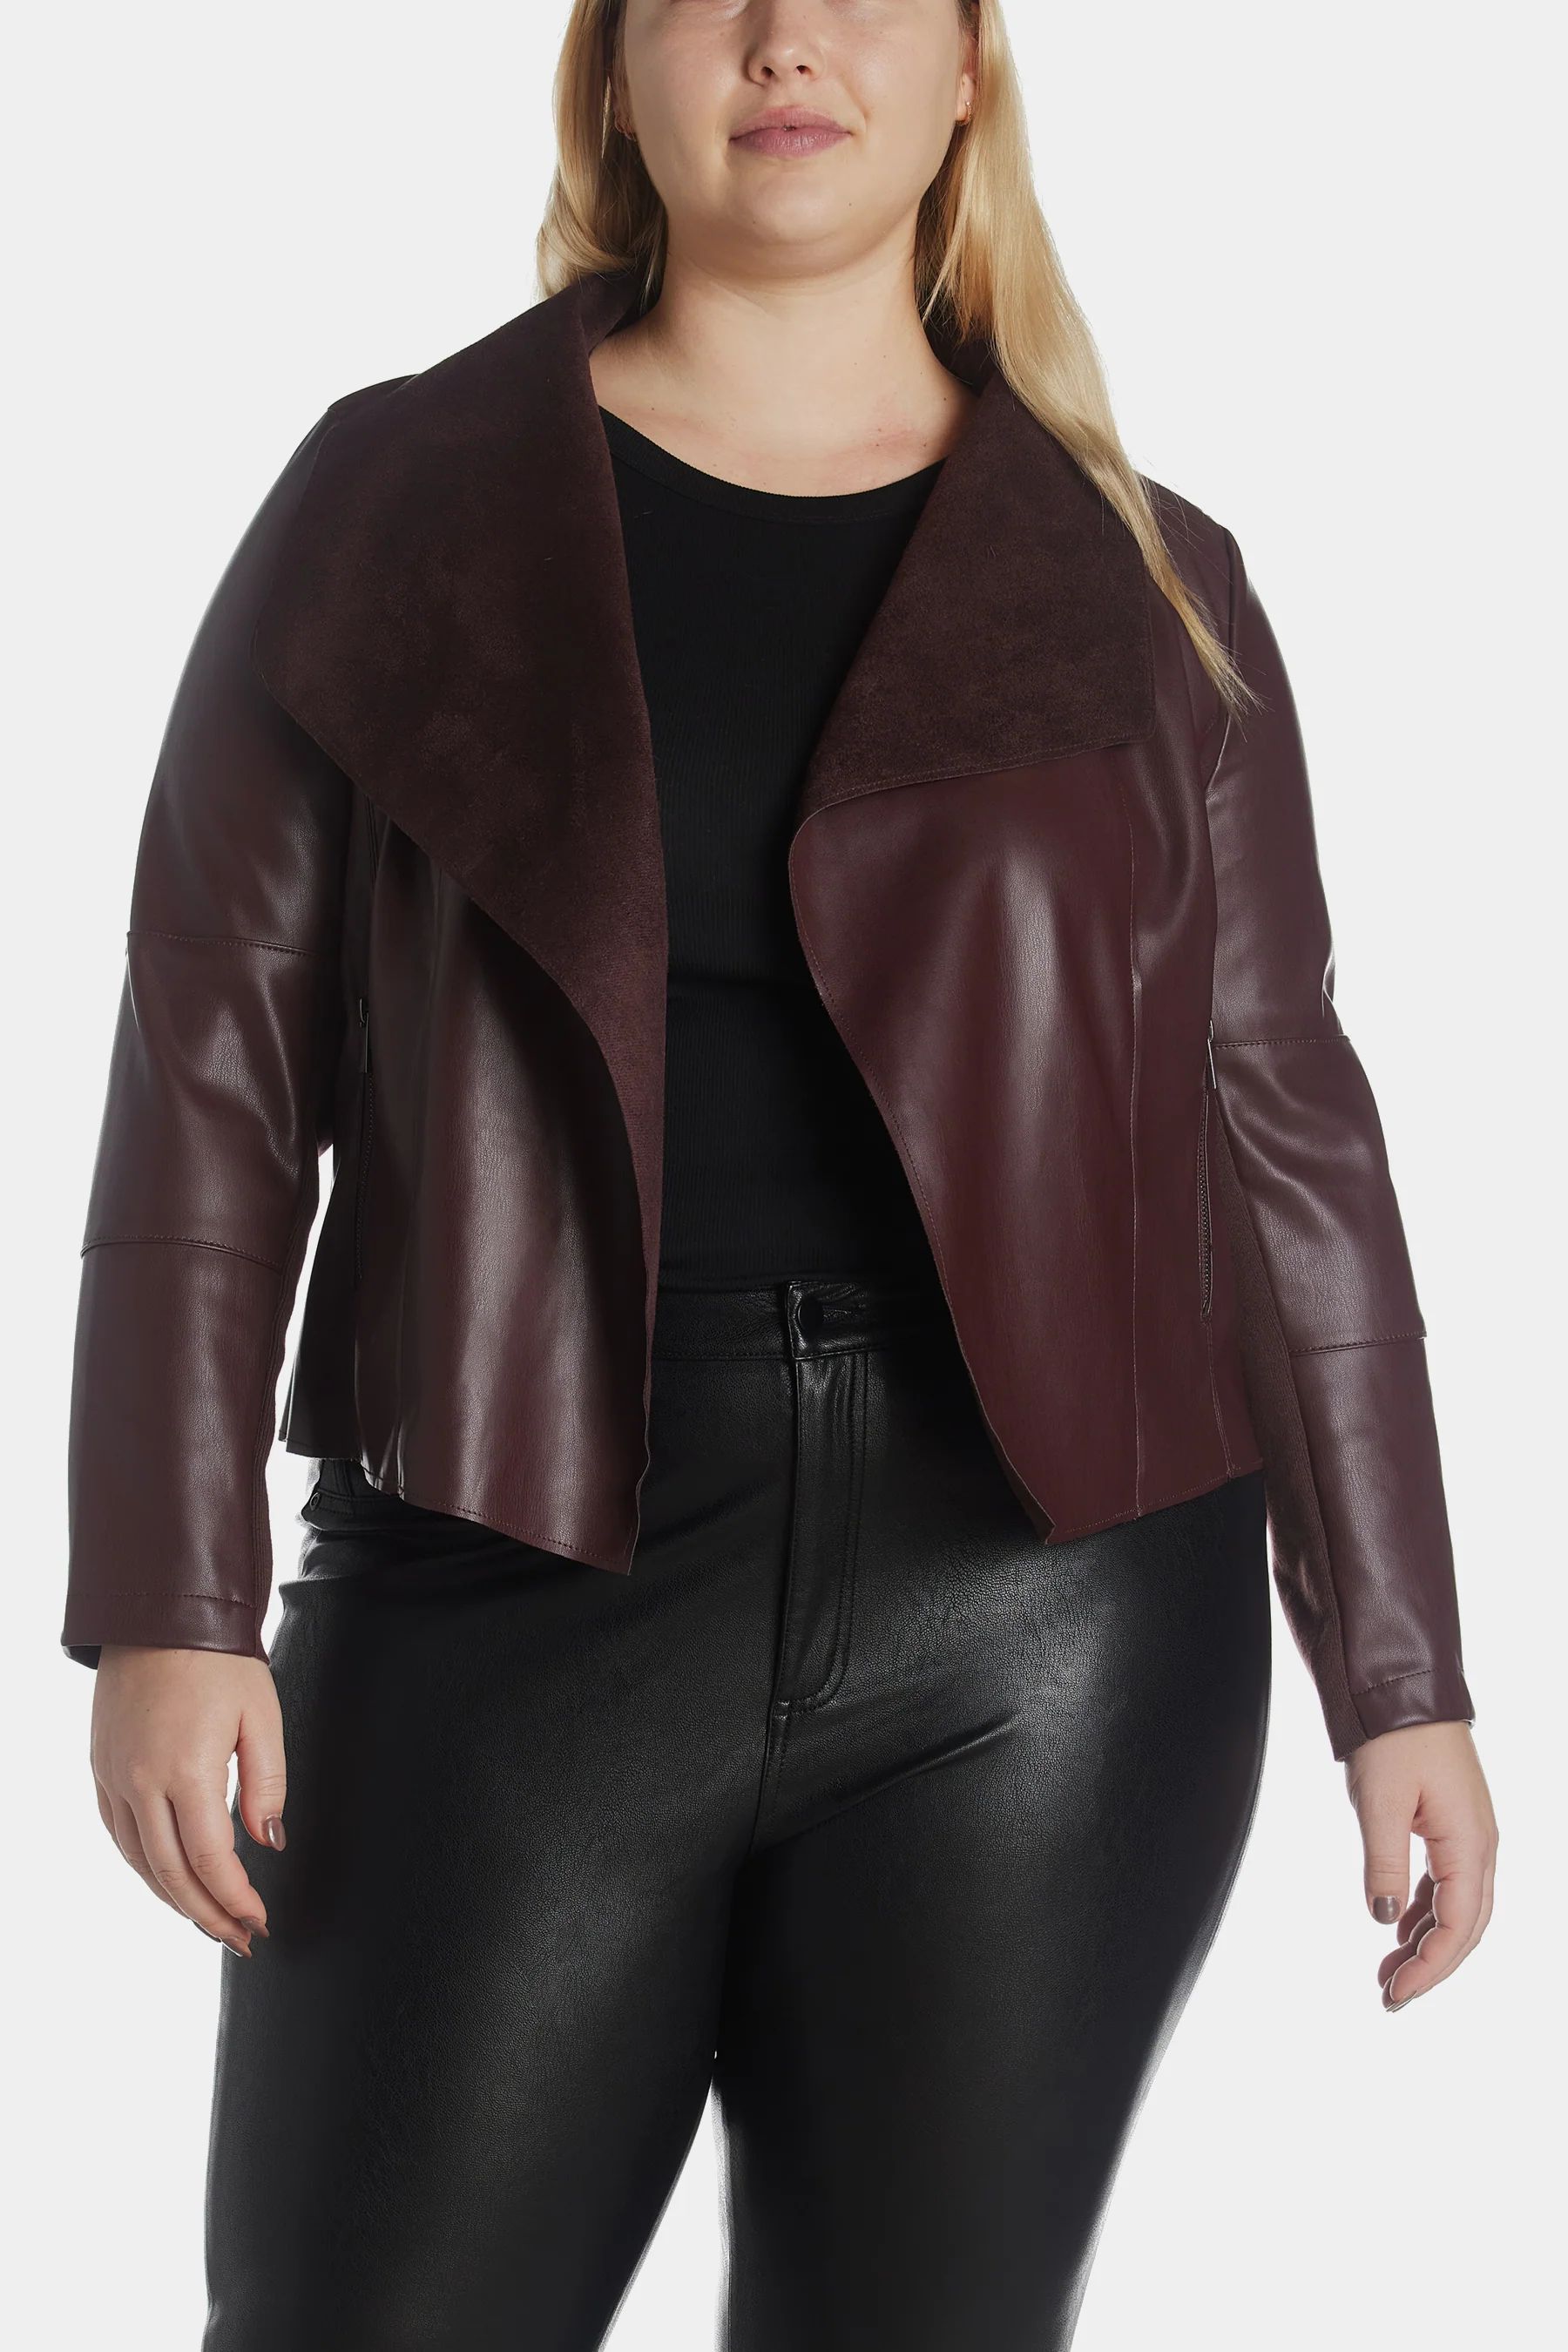 Bagatelle Women's Faux Leather Drape Jacket in Midnight 3X Lord & Taylor | Lord & Taylor